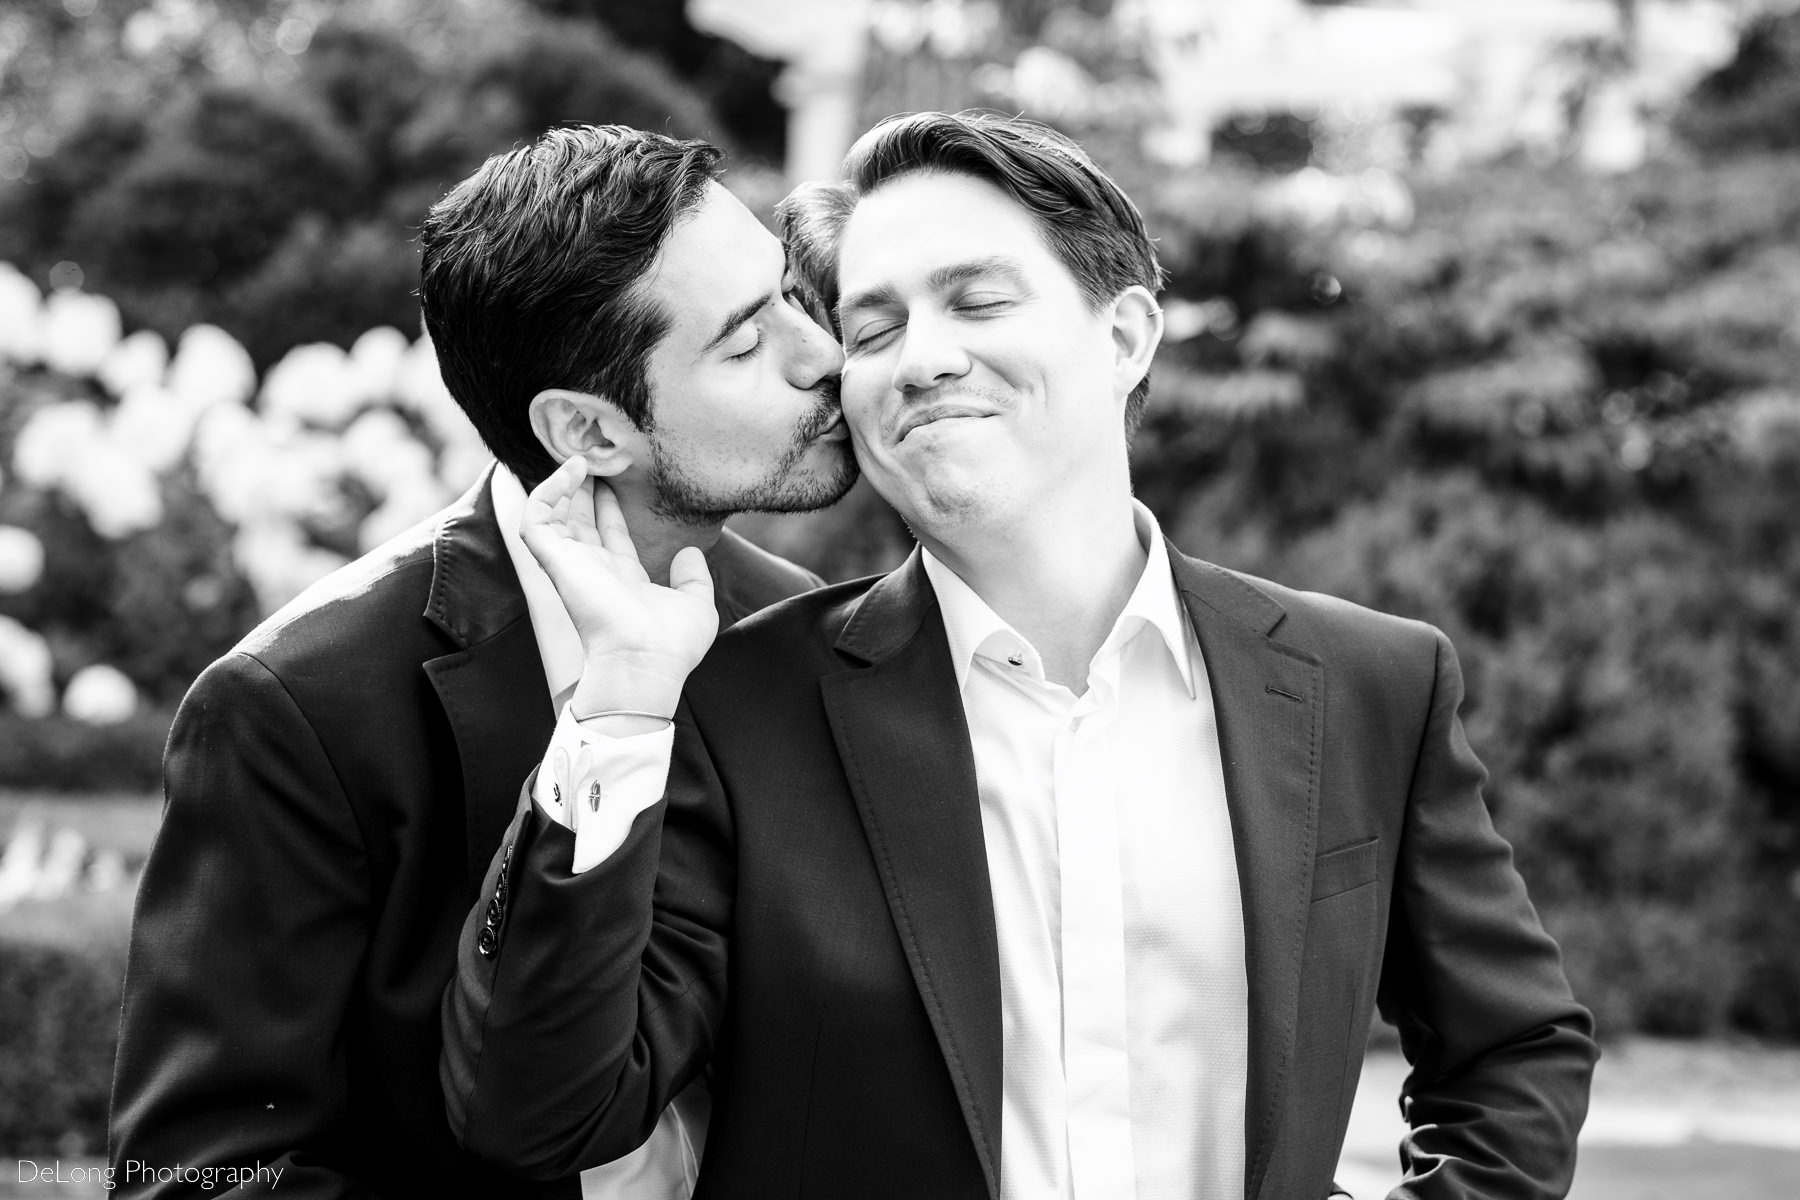 Black and white portrait of groom smiling with his eyes closed touching the face of his husband who is kissing him from behind by Charlotte wedding photographers DeLong Photography